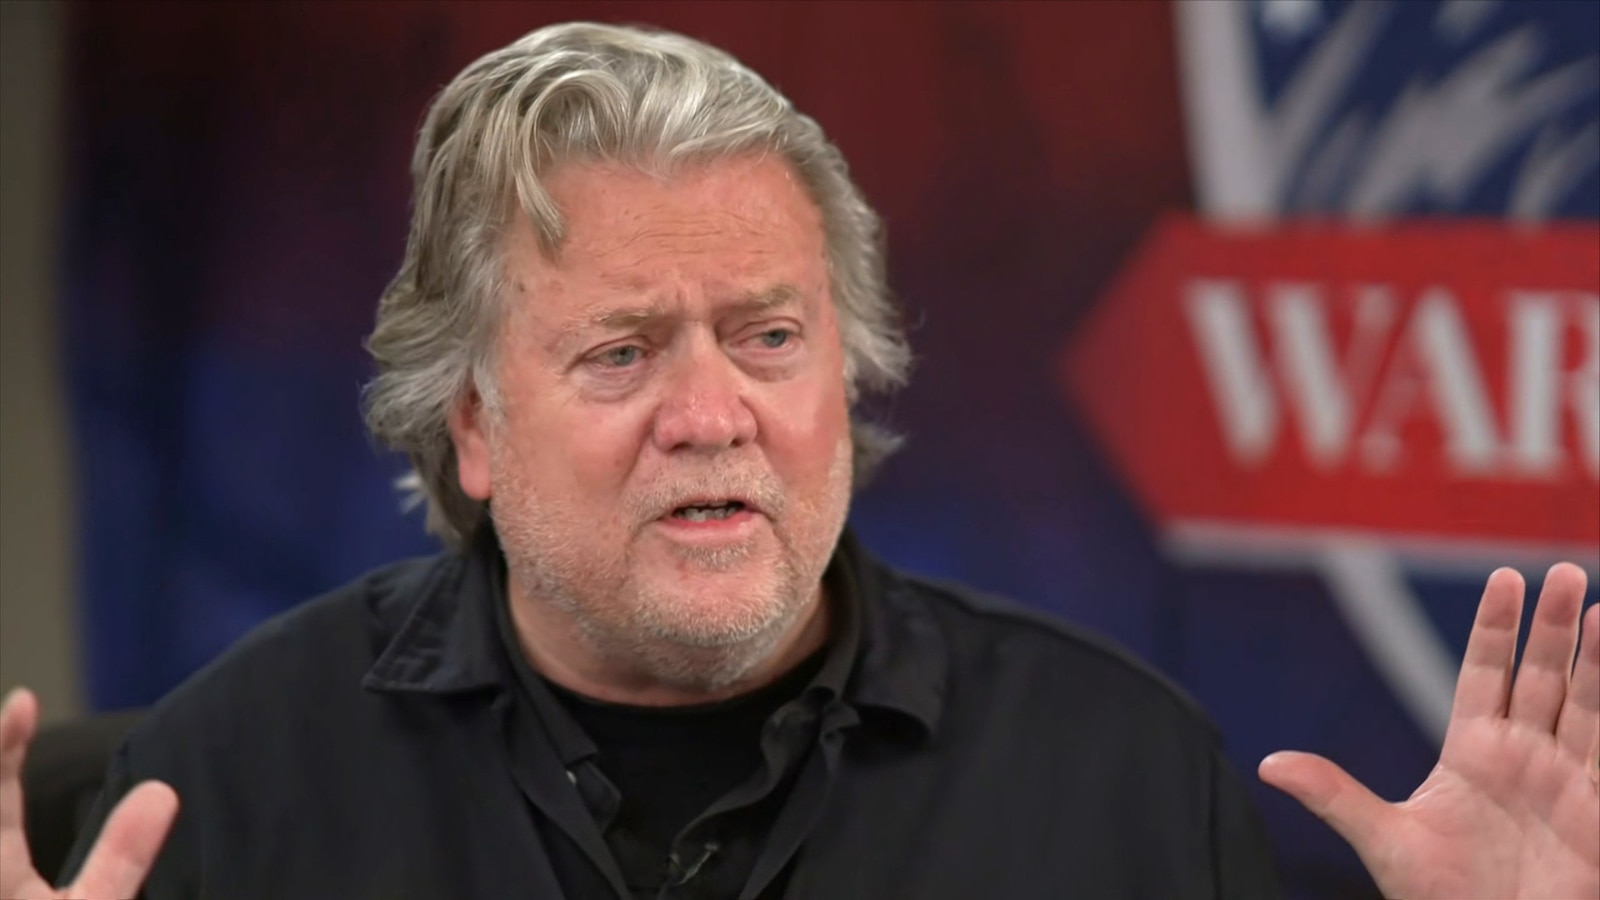 Steve Bannon predicts a landslide victory for Trump in upcoming election